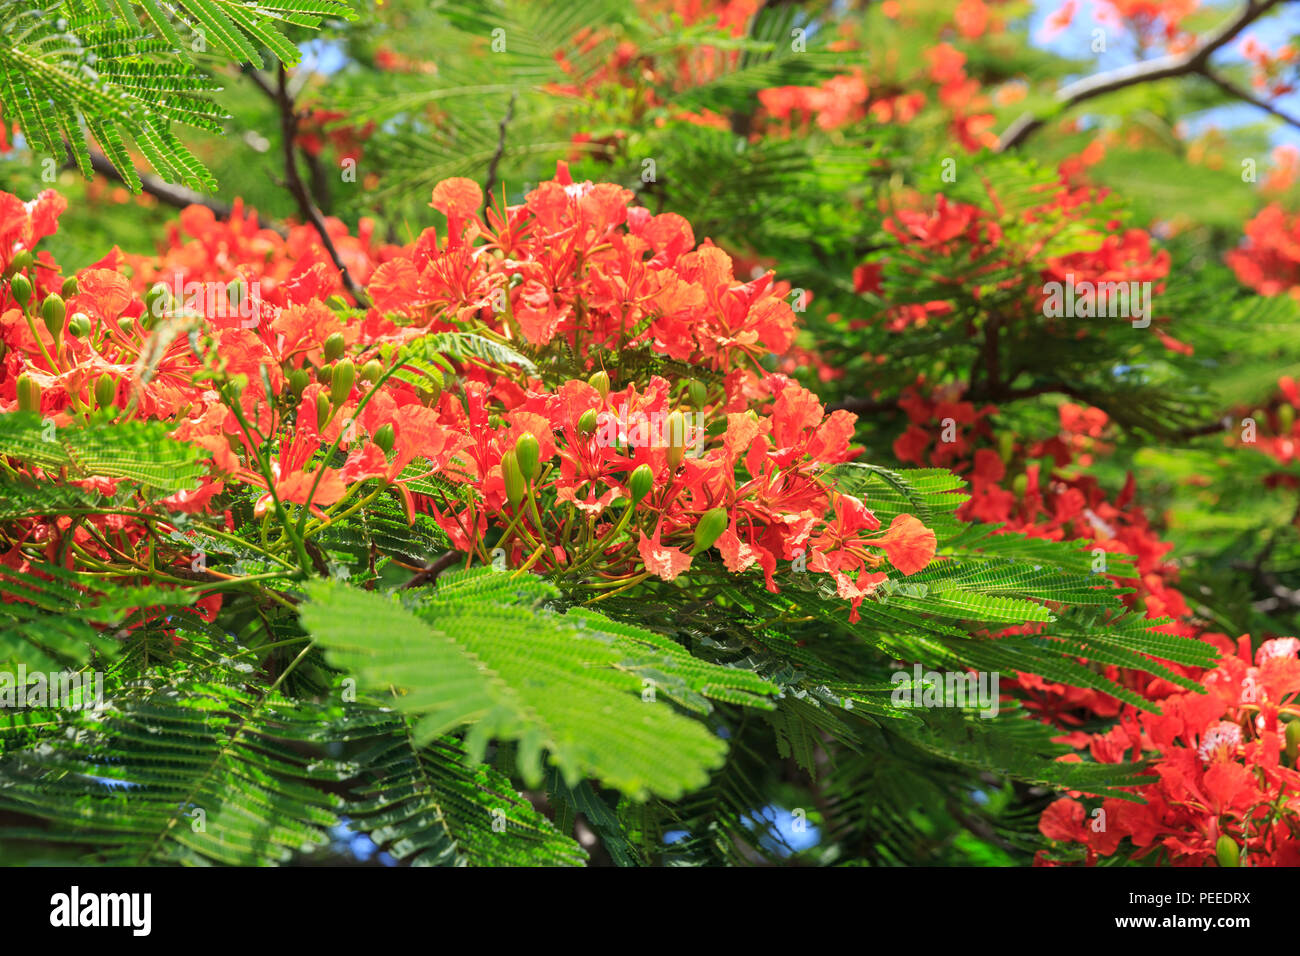 A Flamboyant or Flame Tree (Delonix Regia, Royal Poinciana) in full red flower blossom, close up of flowers, Cuba Stock Photo